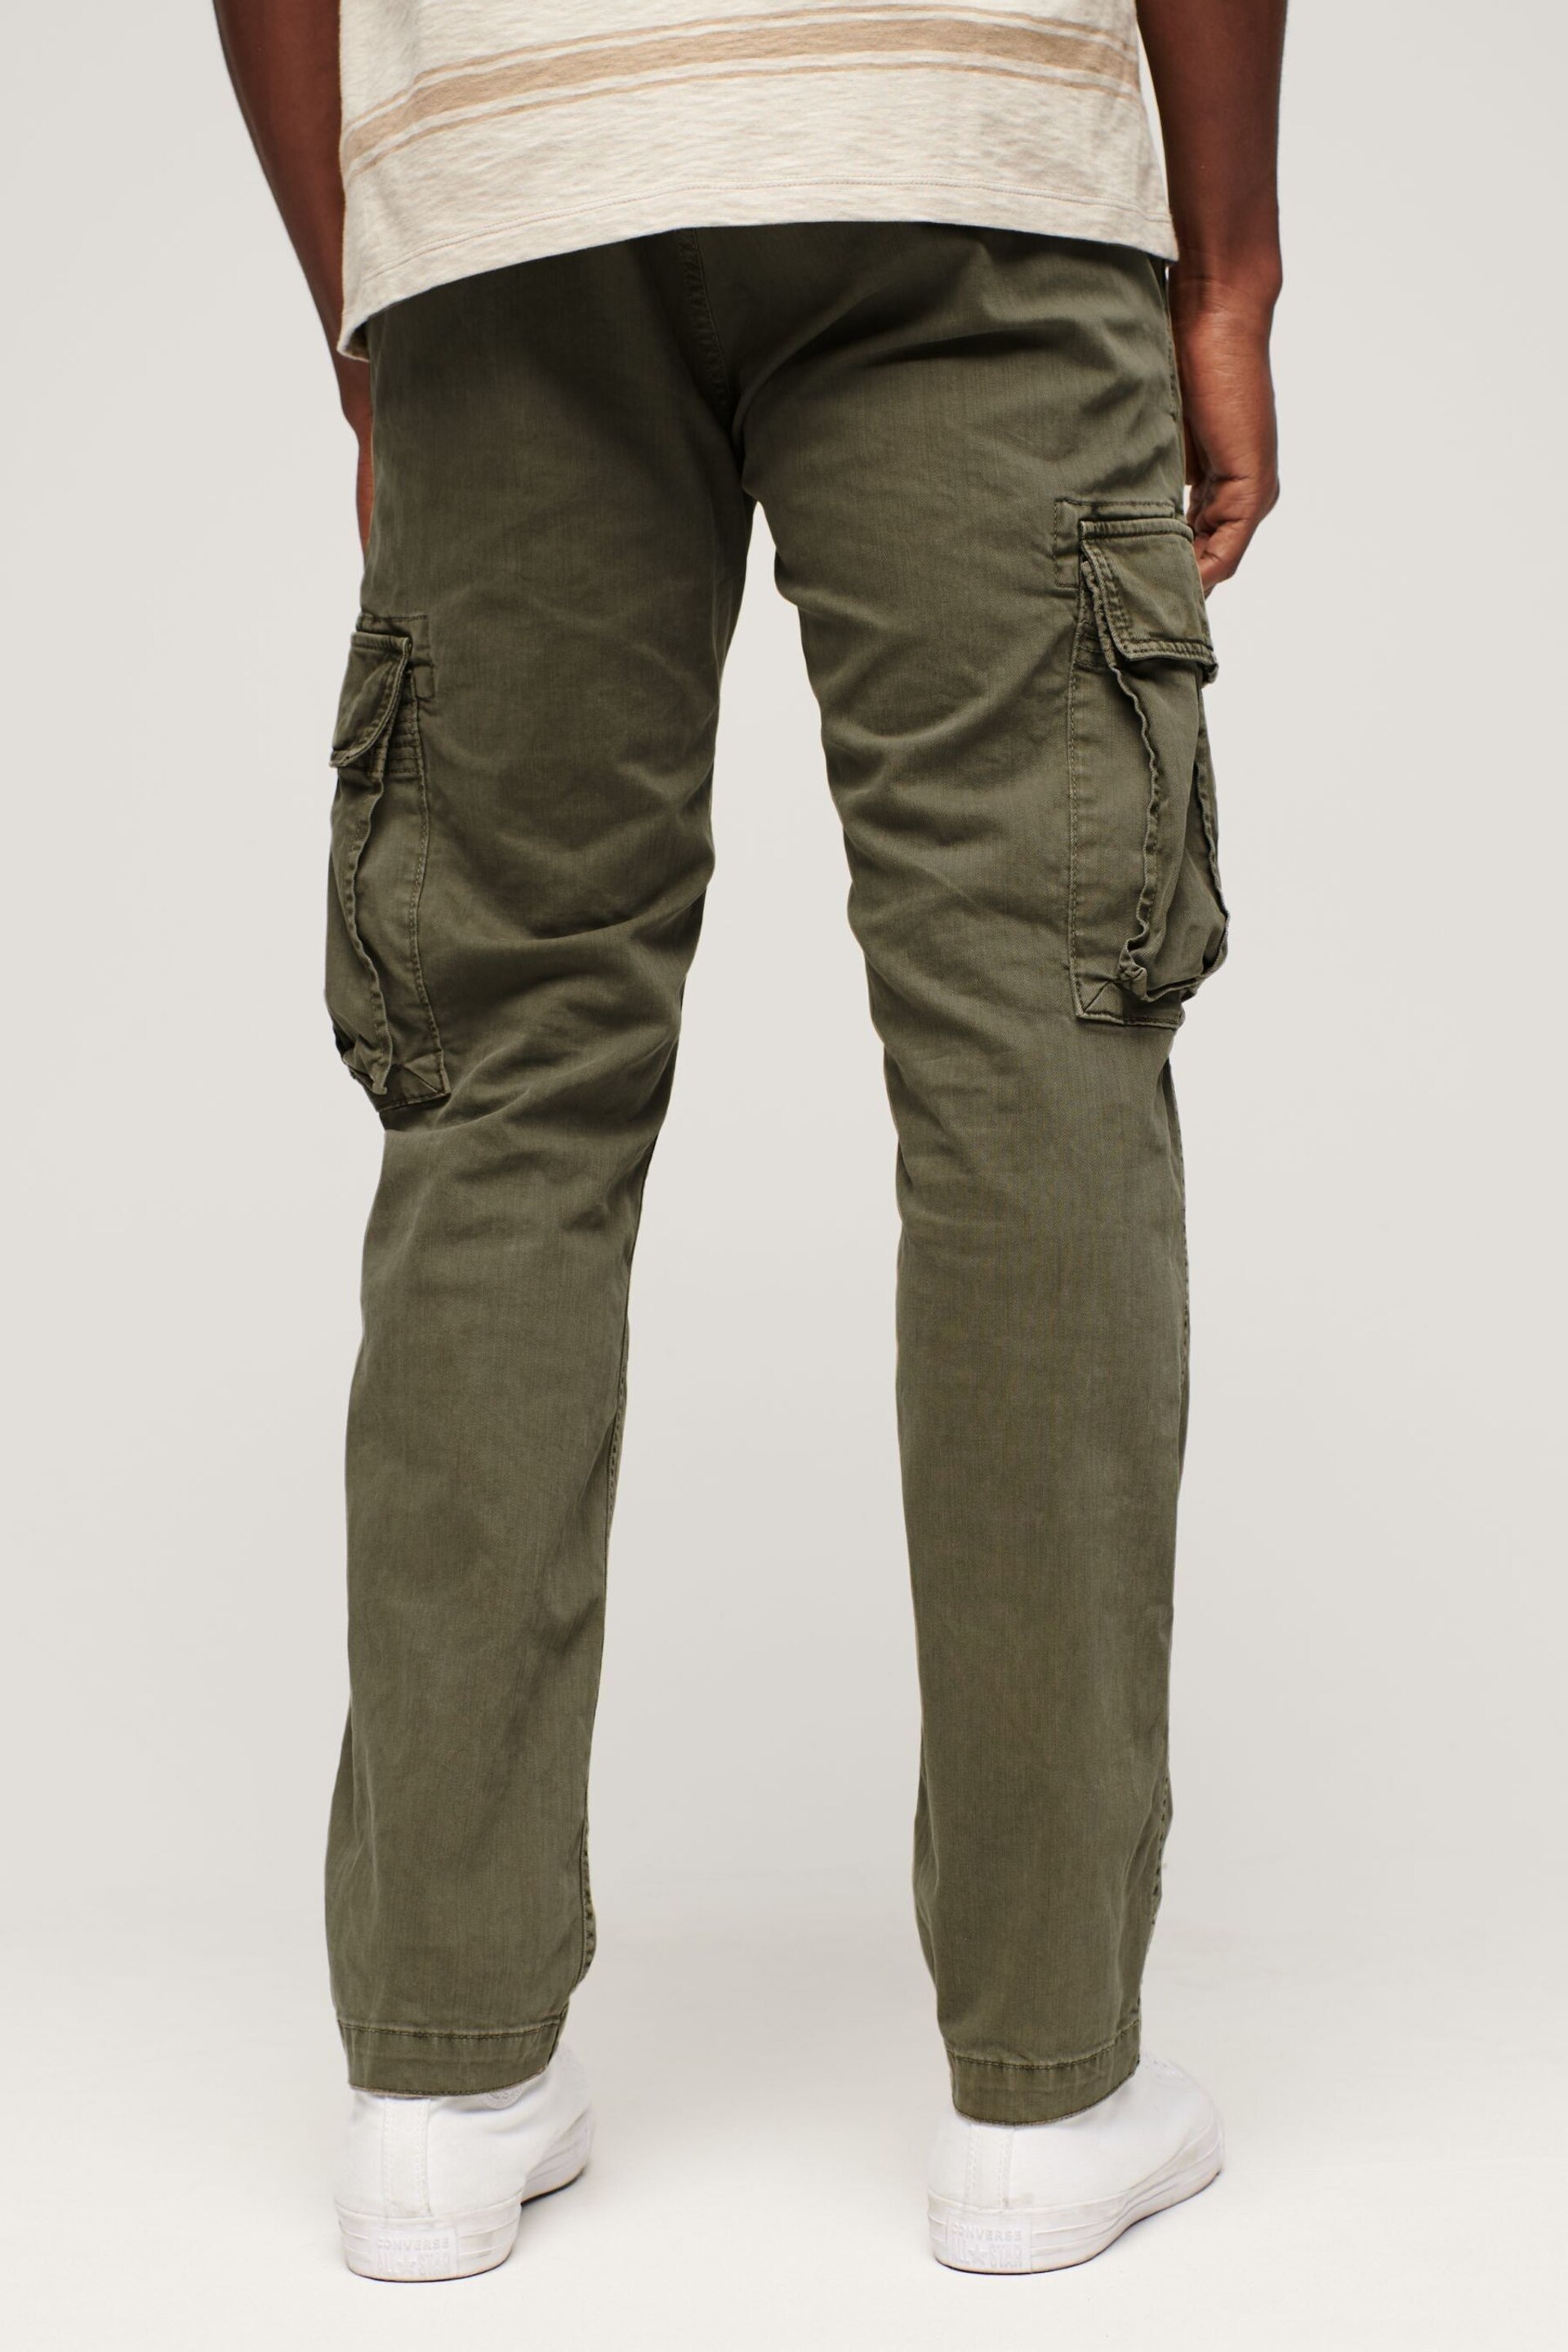 Superdry Green Core Cargo Trousers - Image 2 of 7